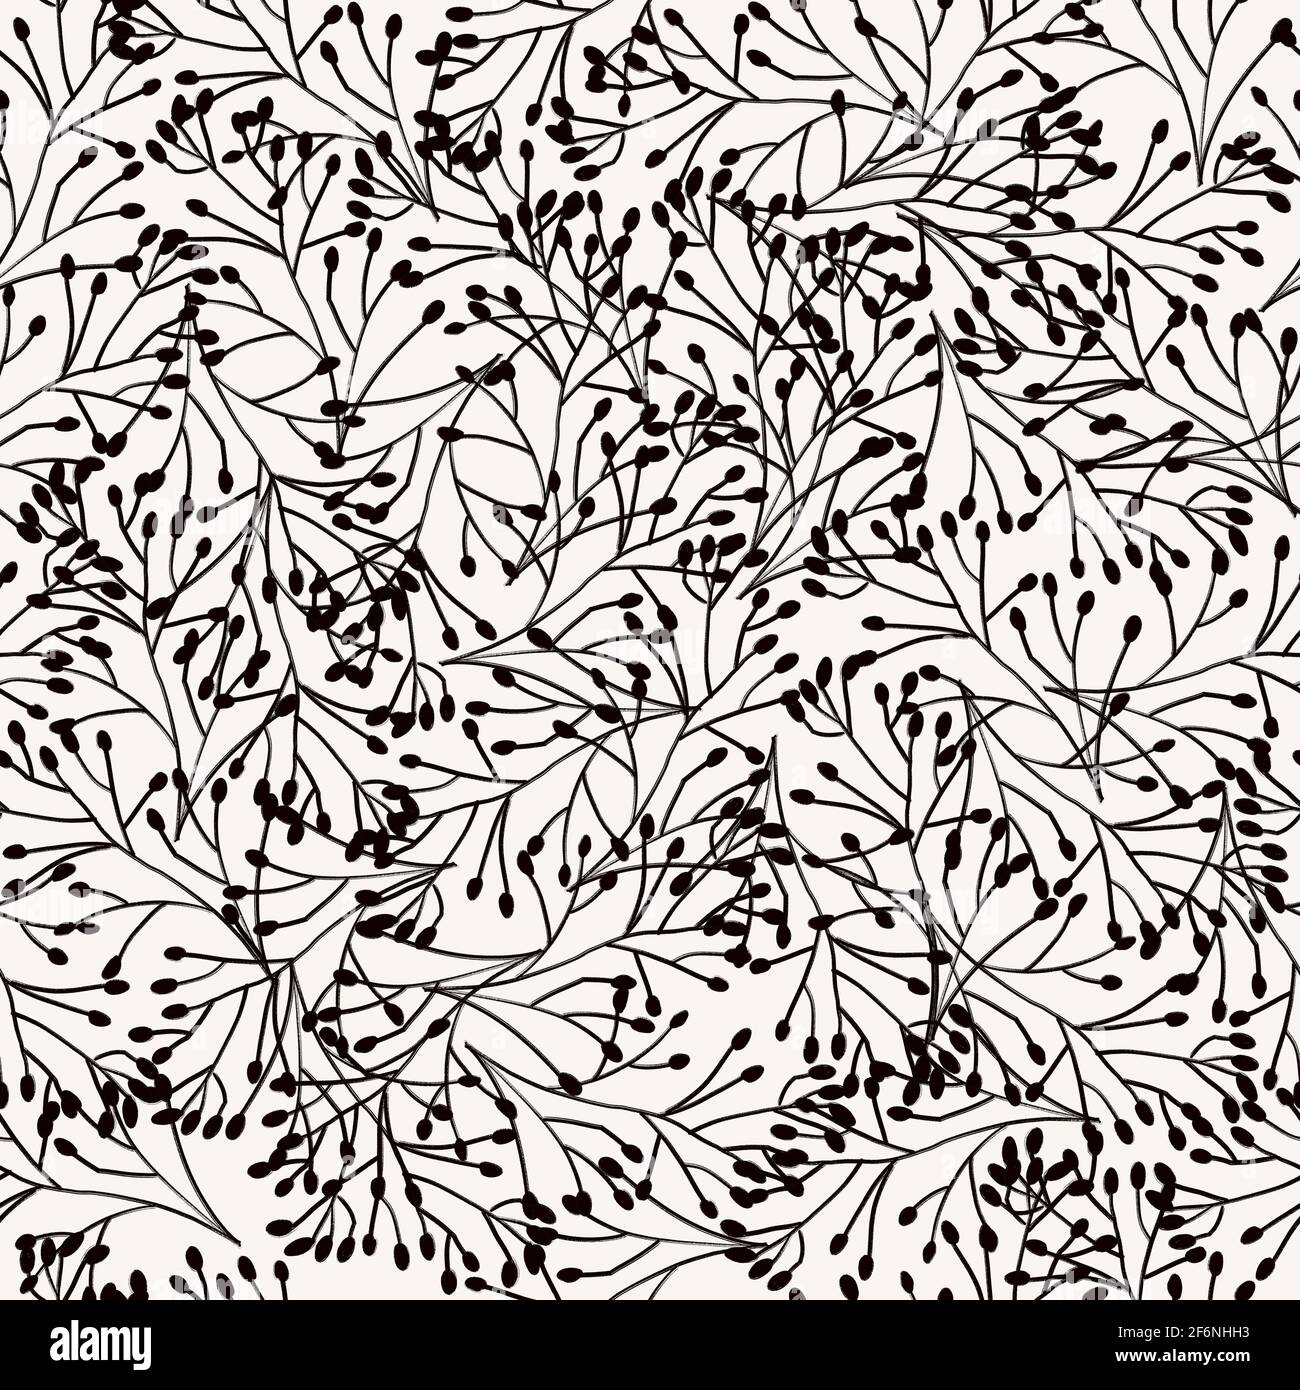 Black and White seamless pattern nature plants ornament, leaves grass branches. Repeating background delicate dense elegant monochrome nature backdrop Stock Photo